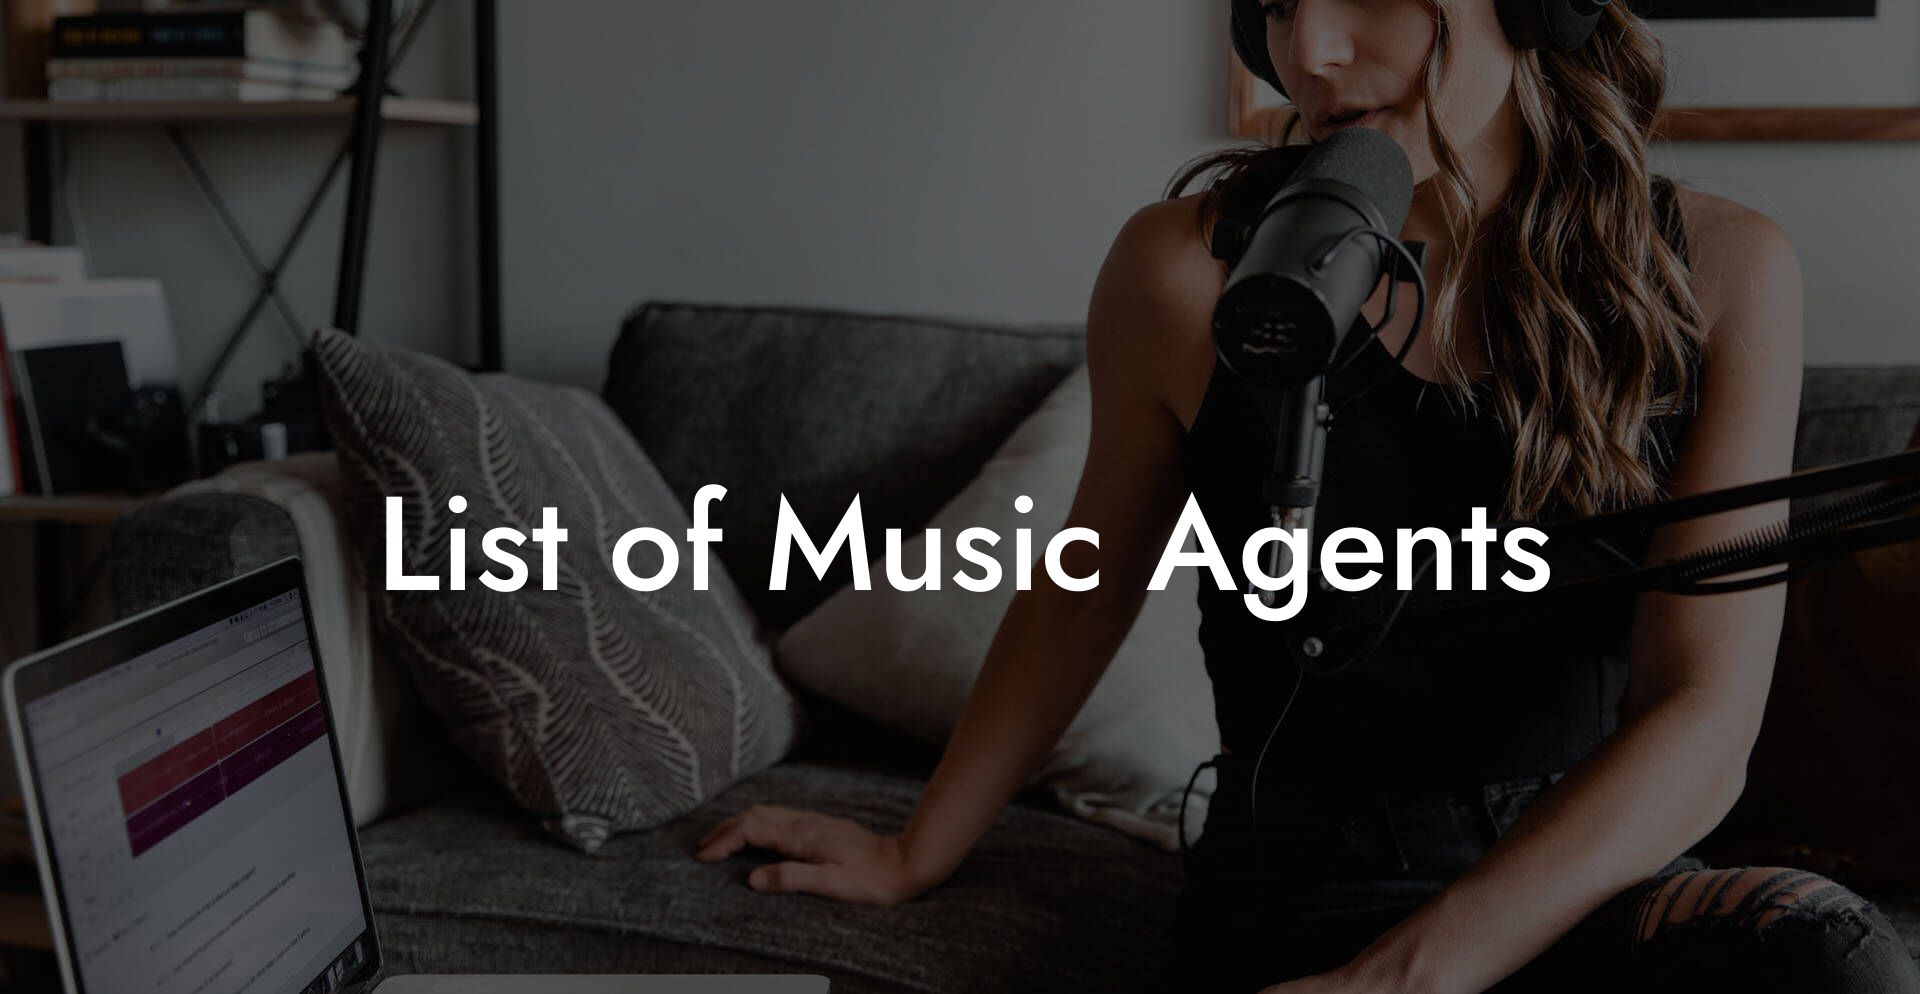 List of Music Agents